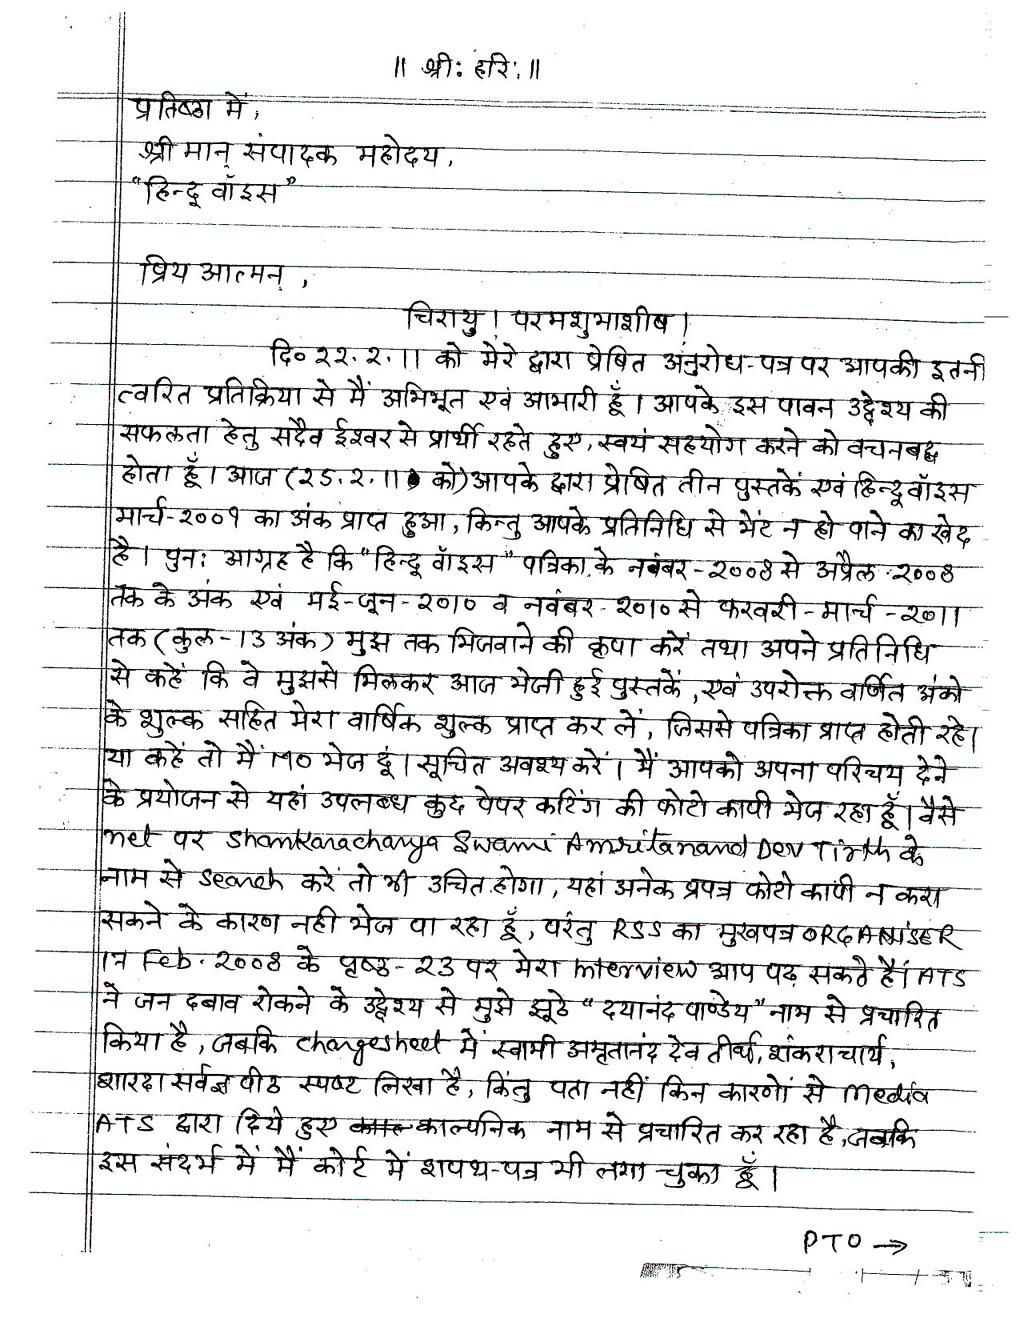 am presenting below the facsimile of the letter in Hindi dated 25 th ...